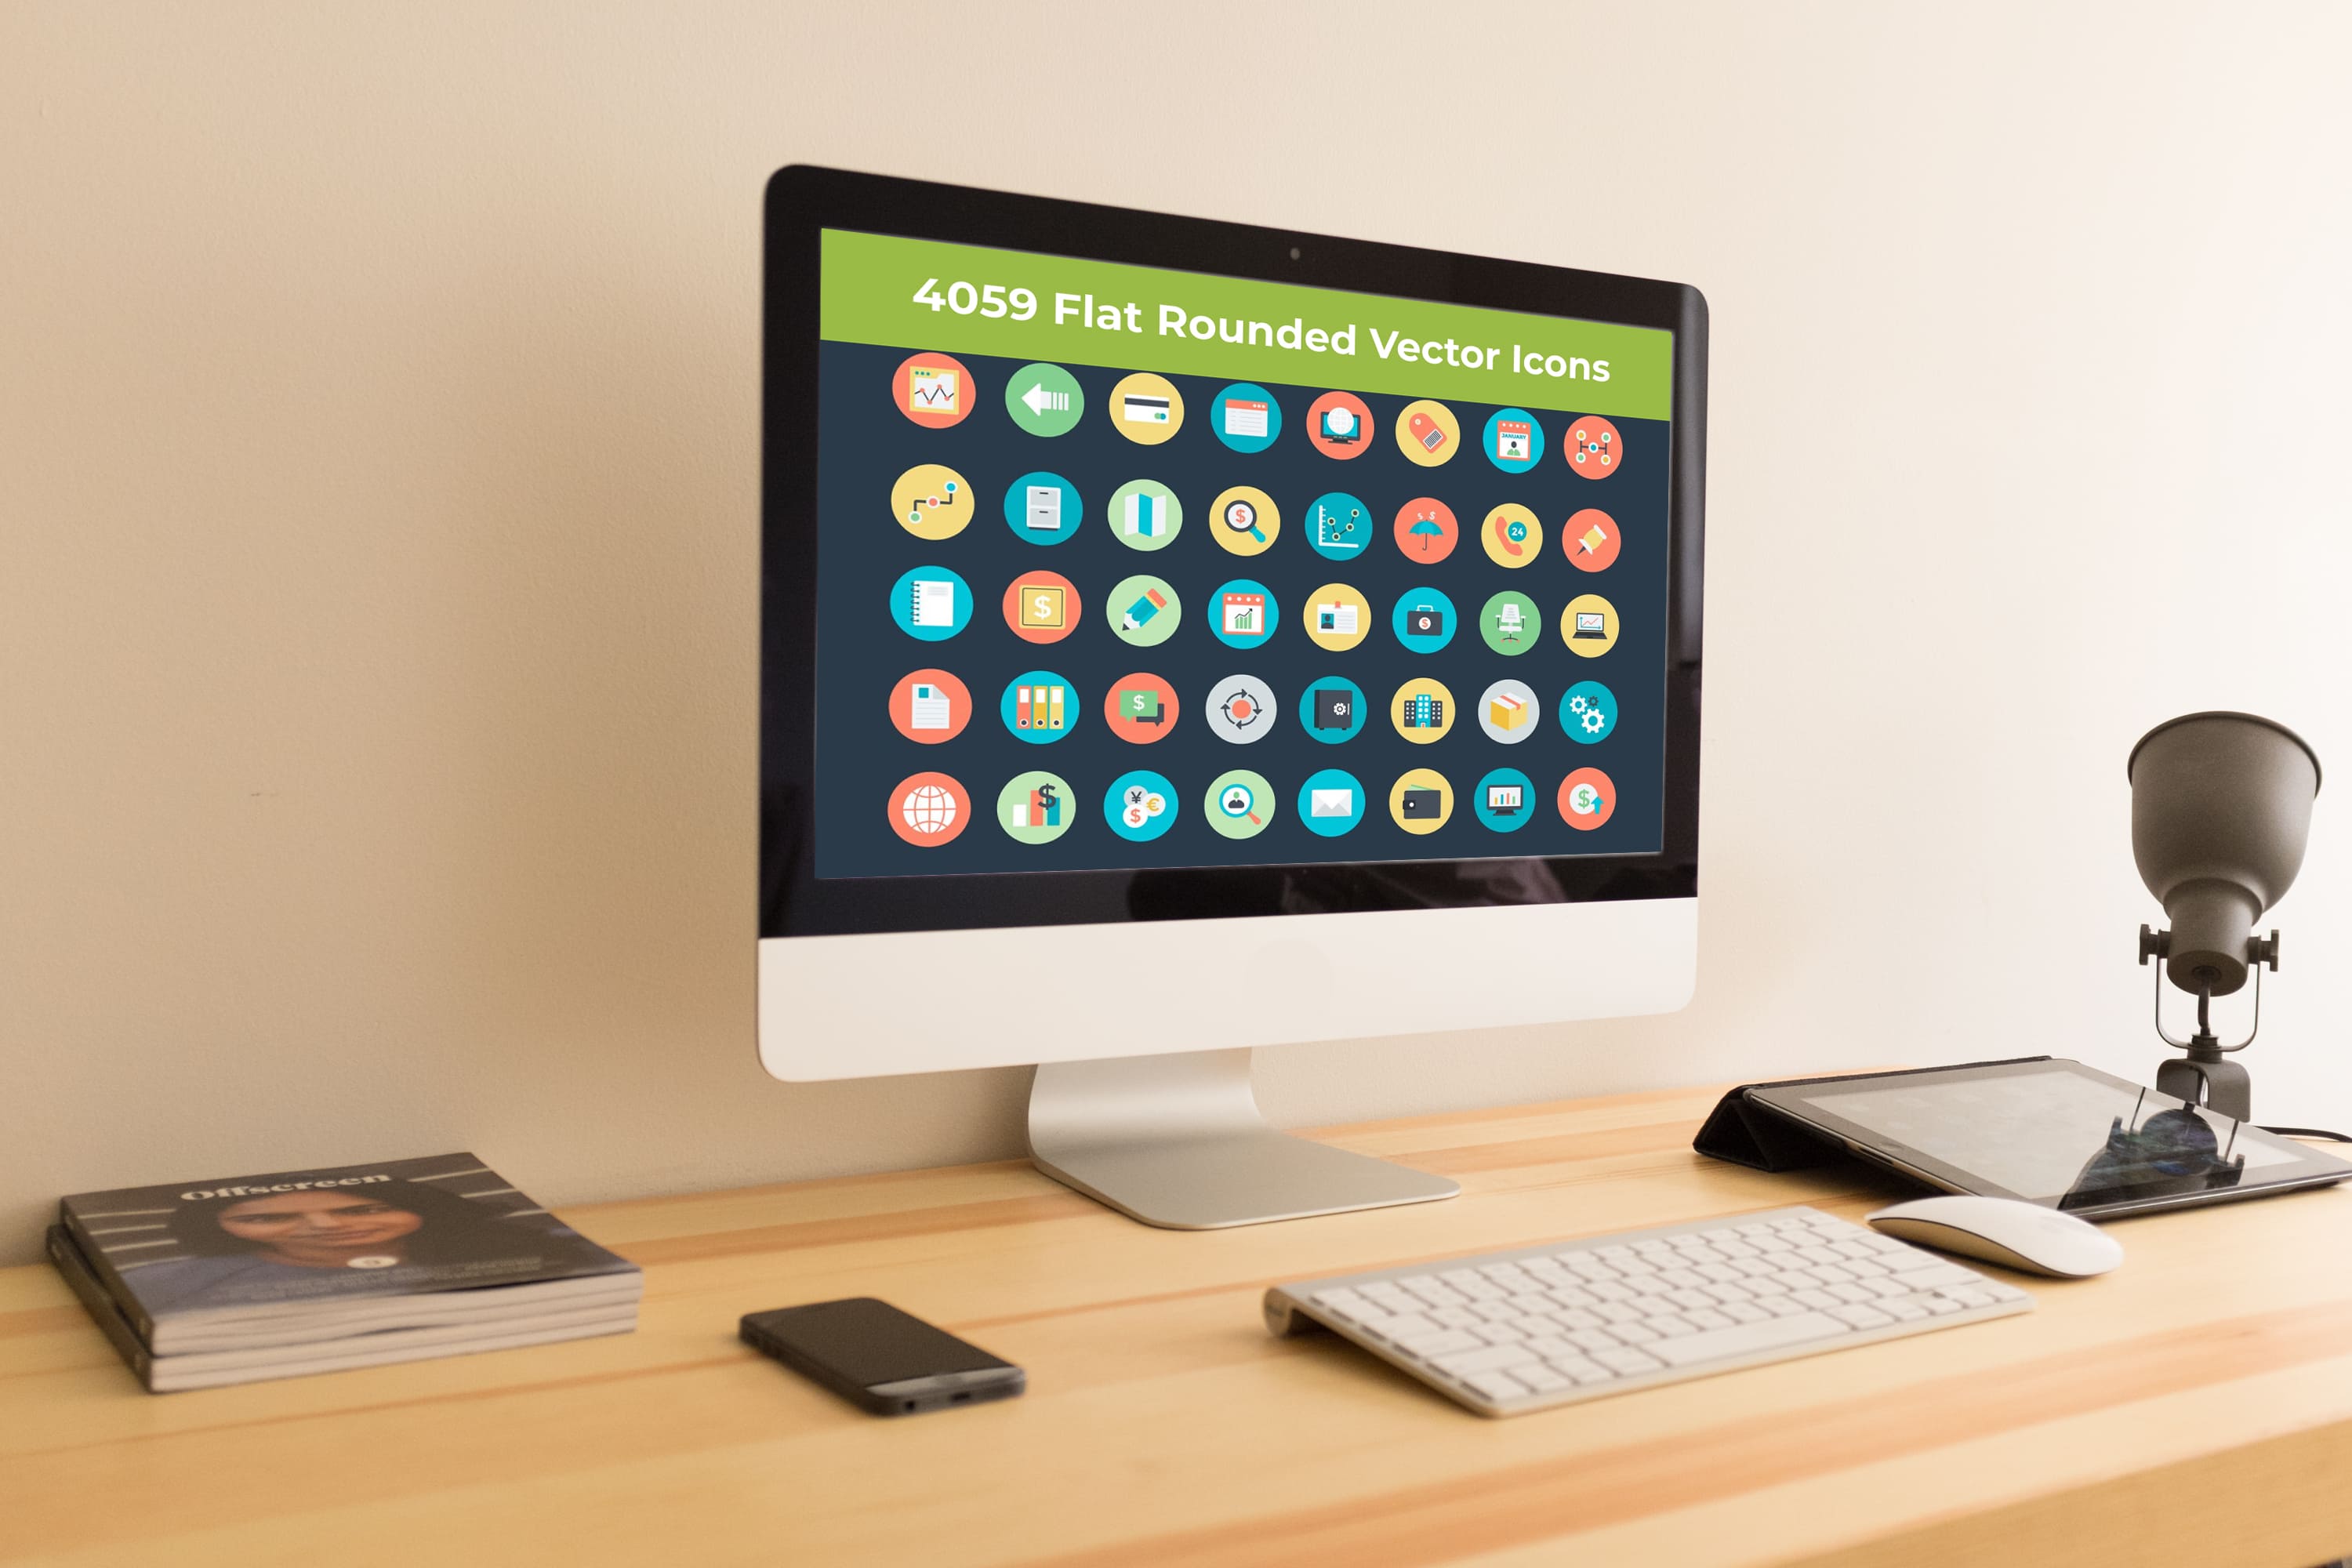 Desktop option of the 4059 Flat Rounded Vector Icons.